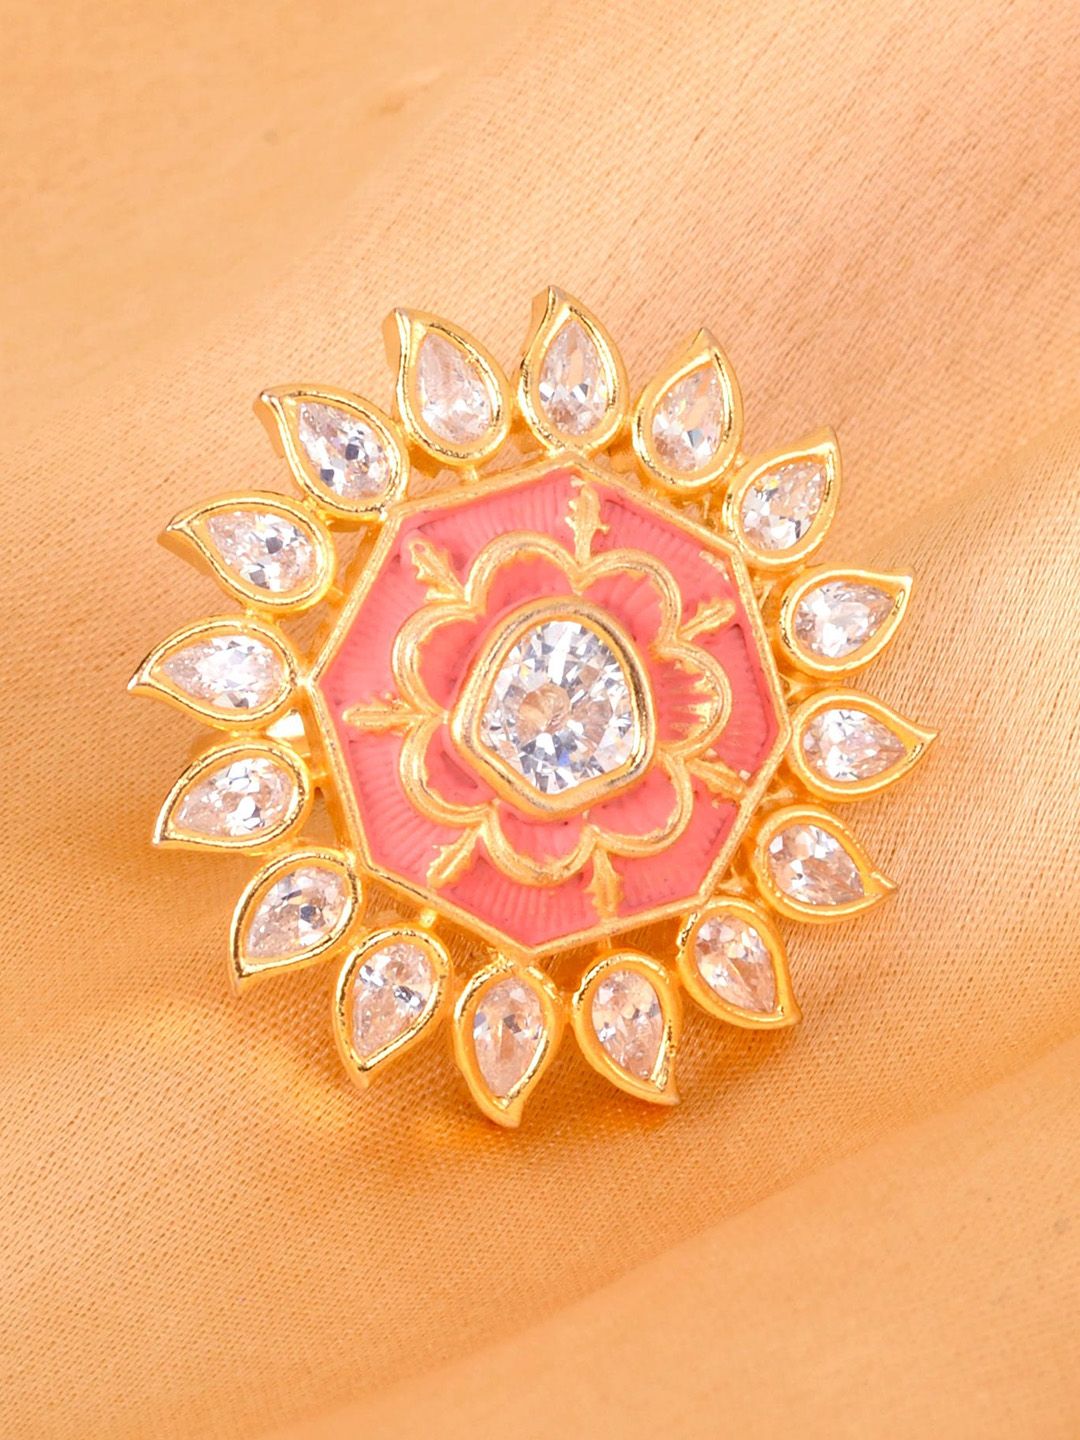 Saraf RS Jewellery Gold-Plated Pink & White AD-Studded Handcrafted Adjustable Finger Ring Price in India